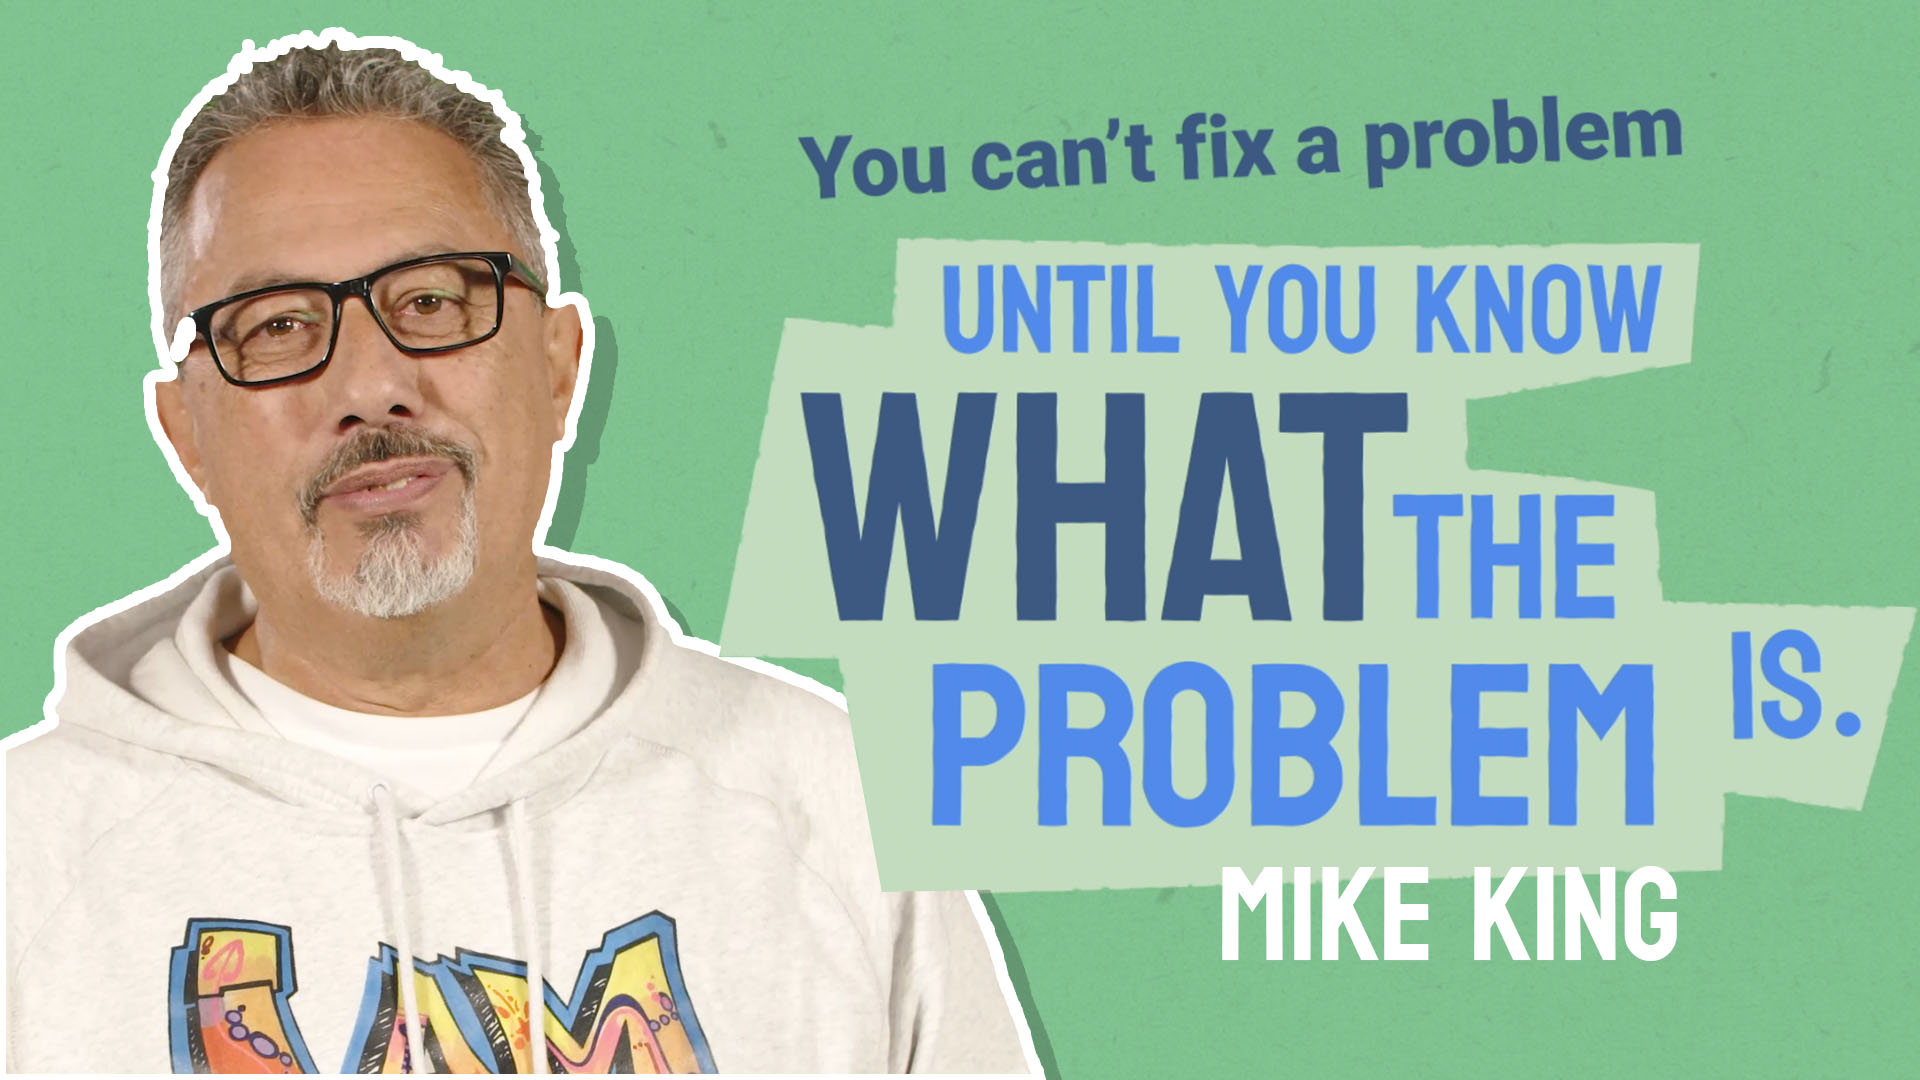 Mike King: You can’t fix a problem until you know what the problem is